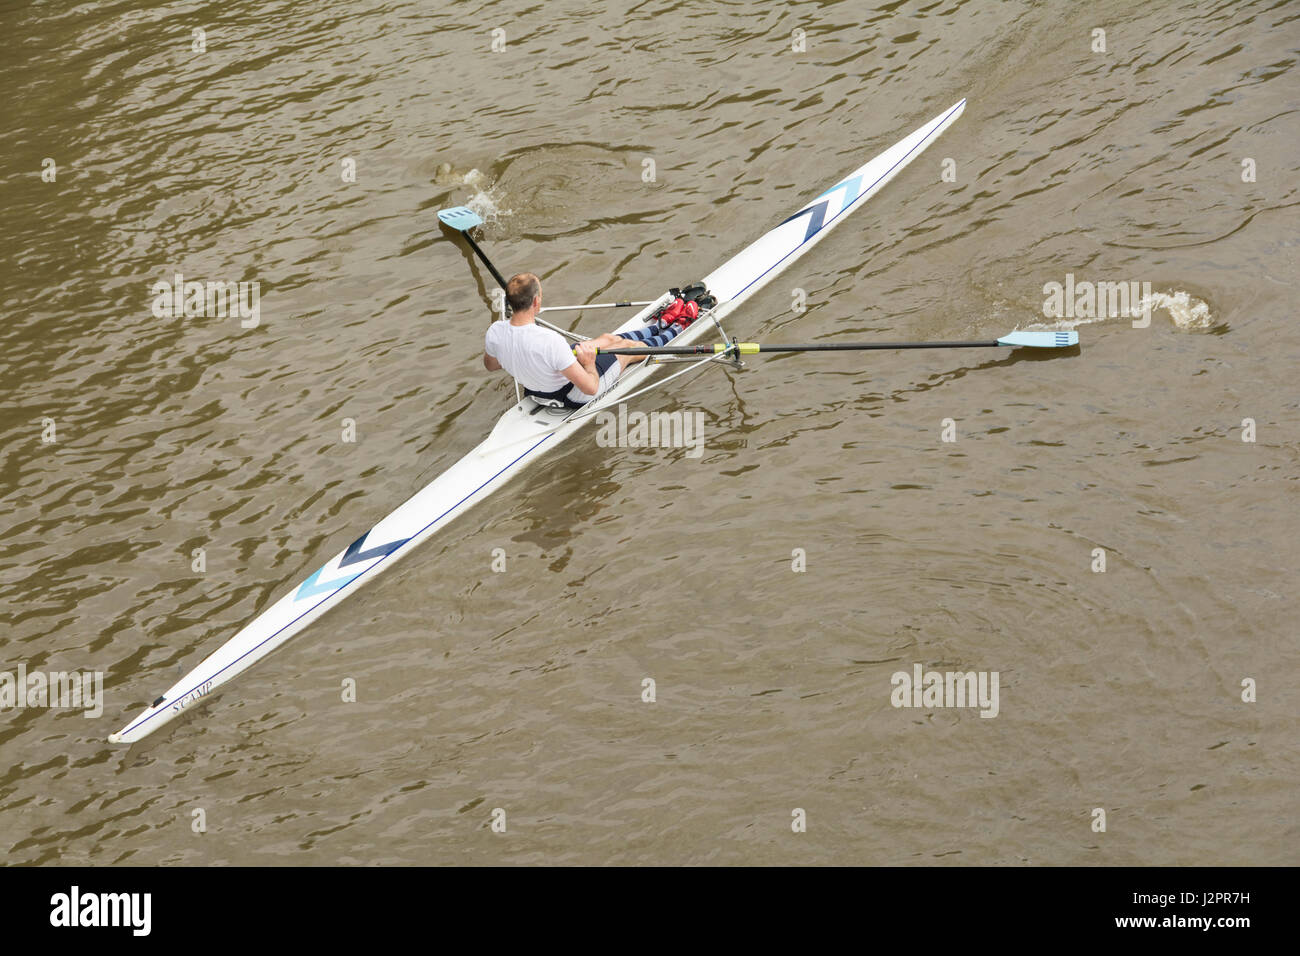 A man sculling on the River Thames in London, England, UK Stock Photo